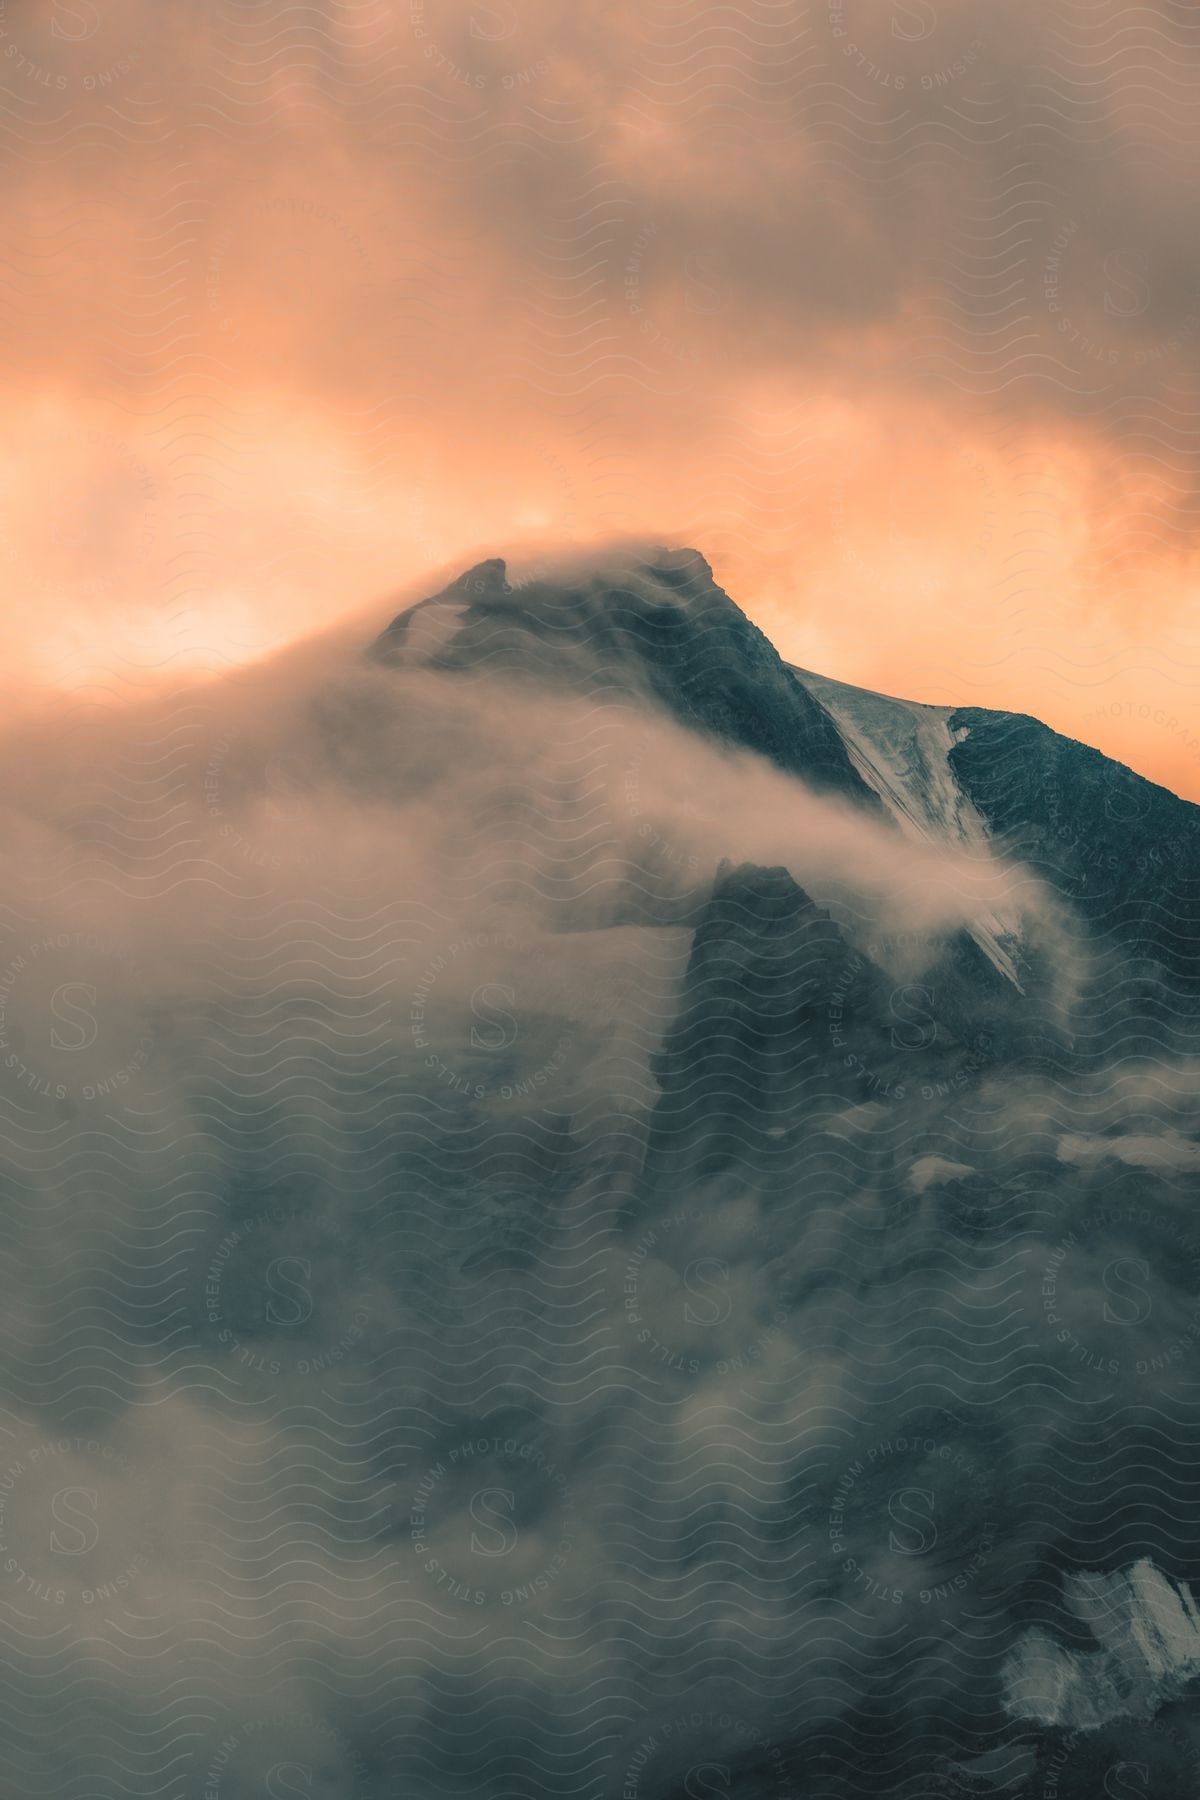 Mountain tops covered in fog